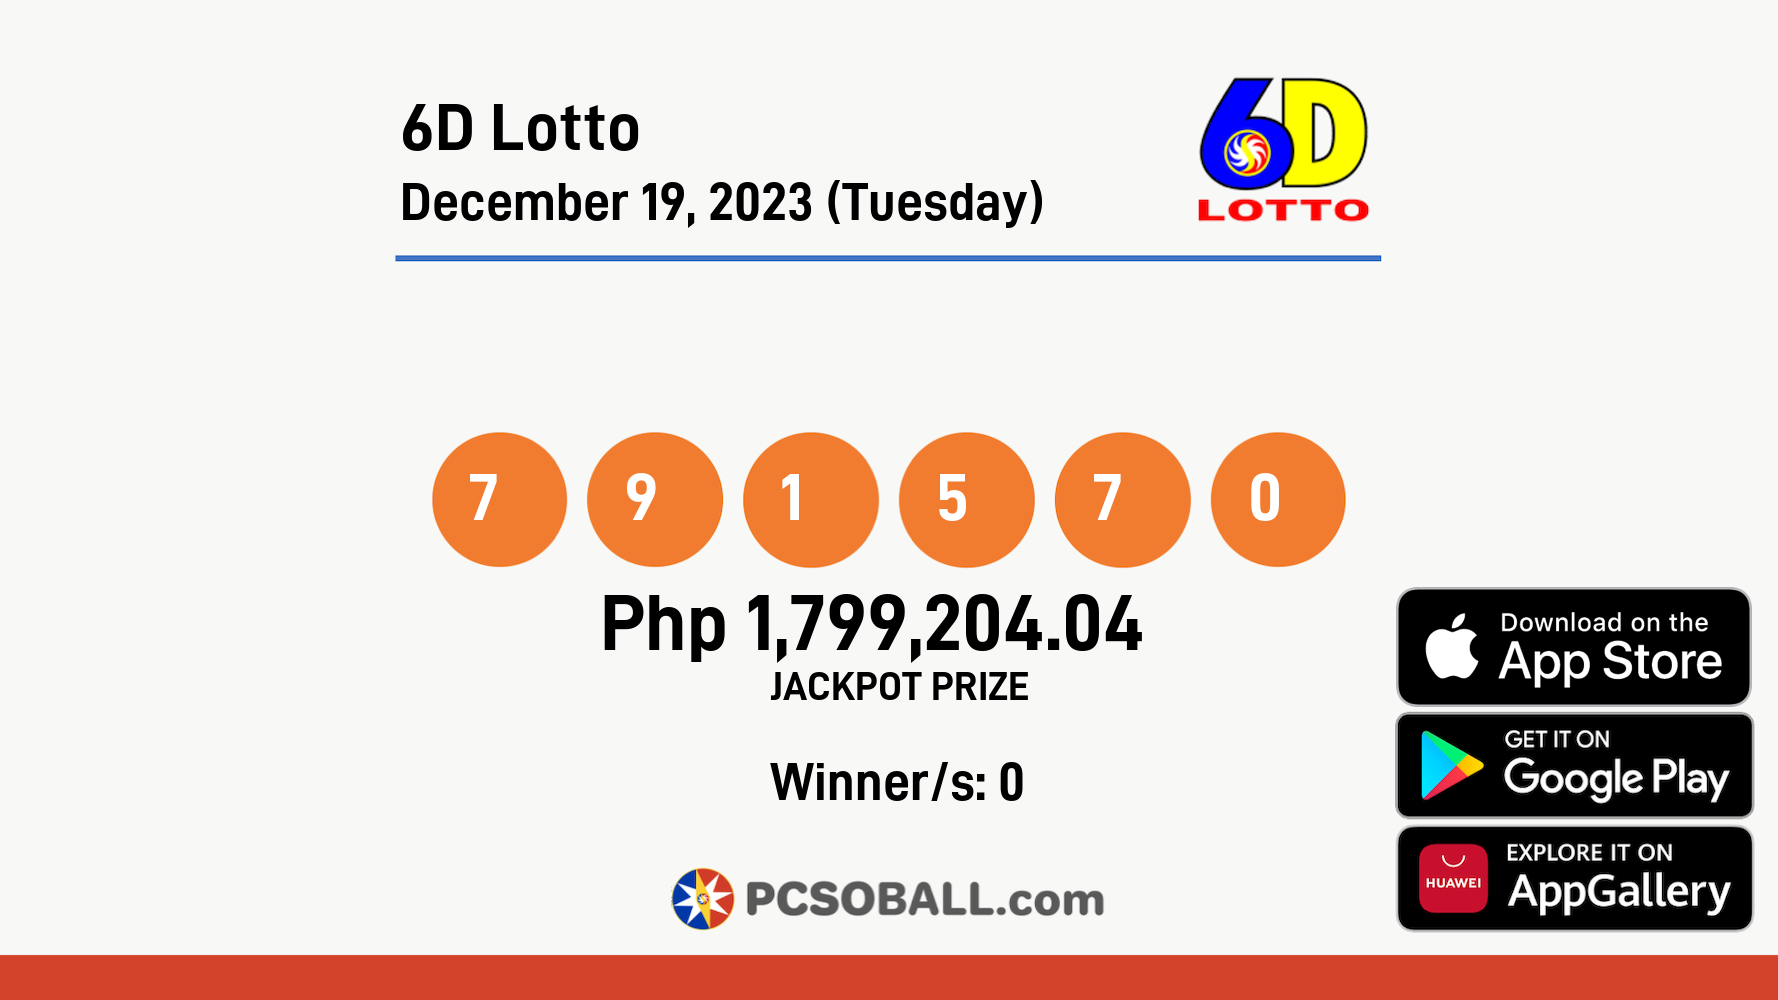 6D Lotto December 19, 2023 (Tuesday) Result